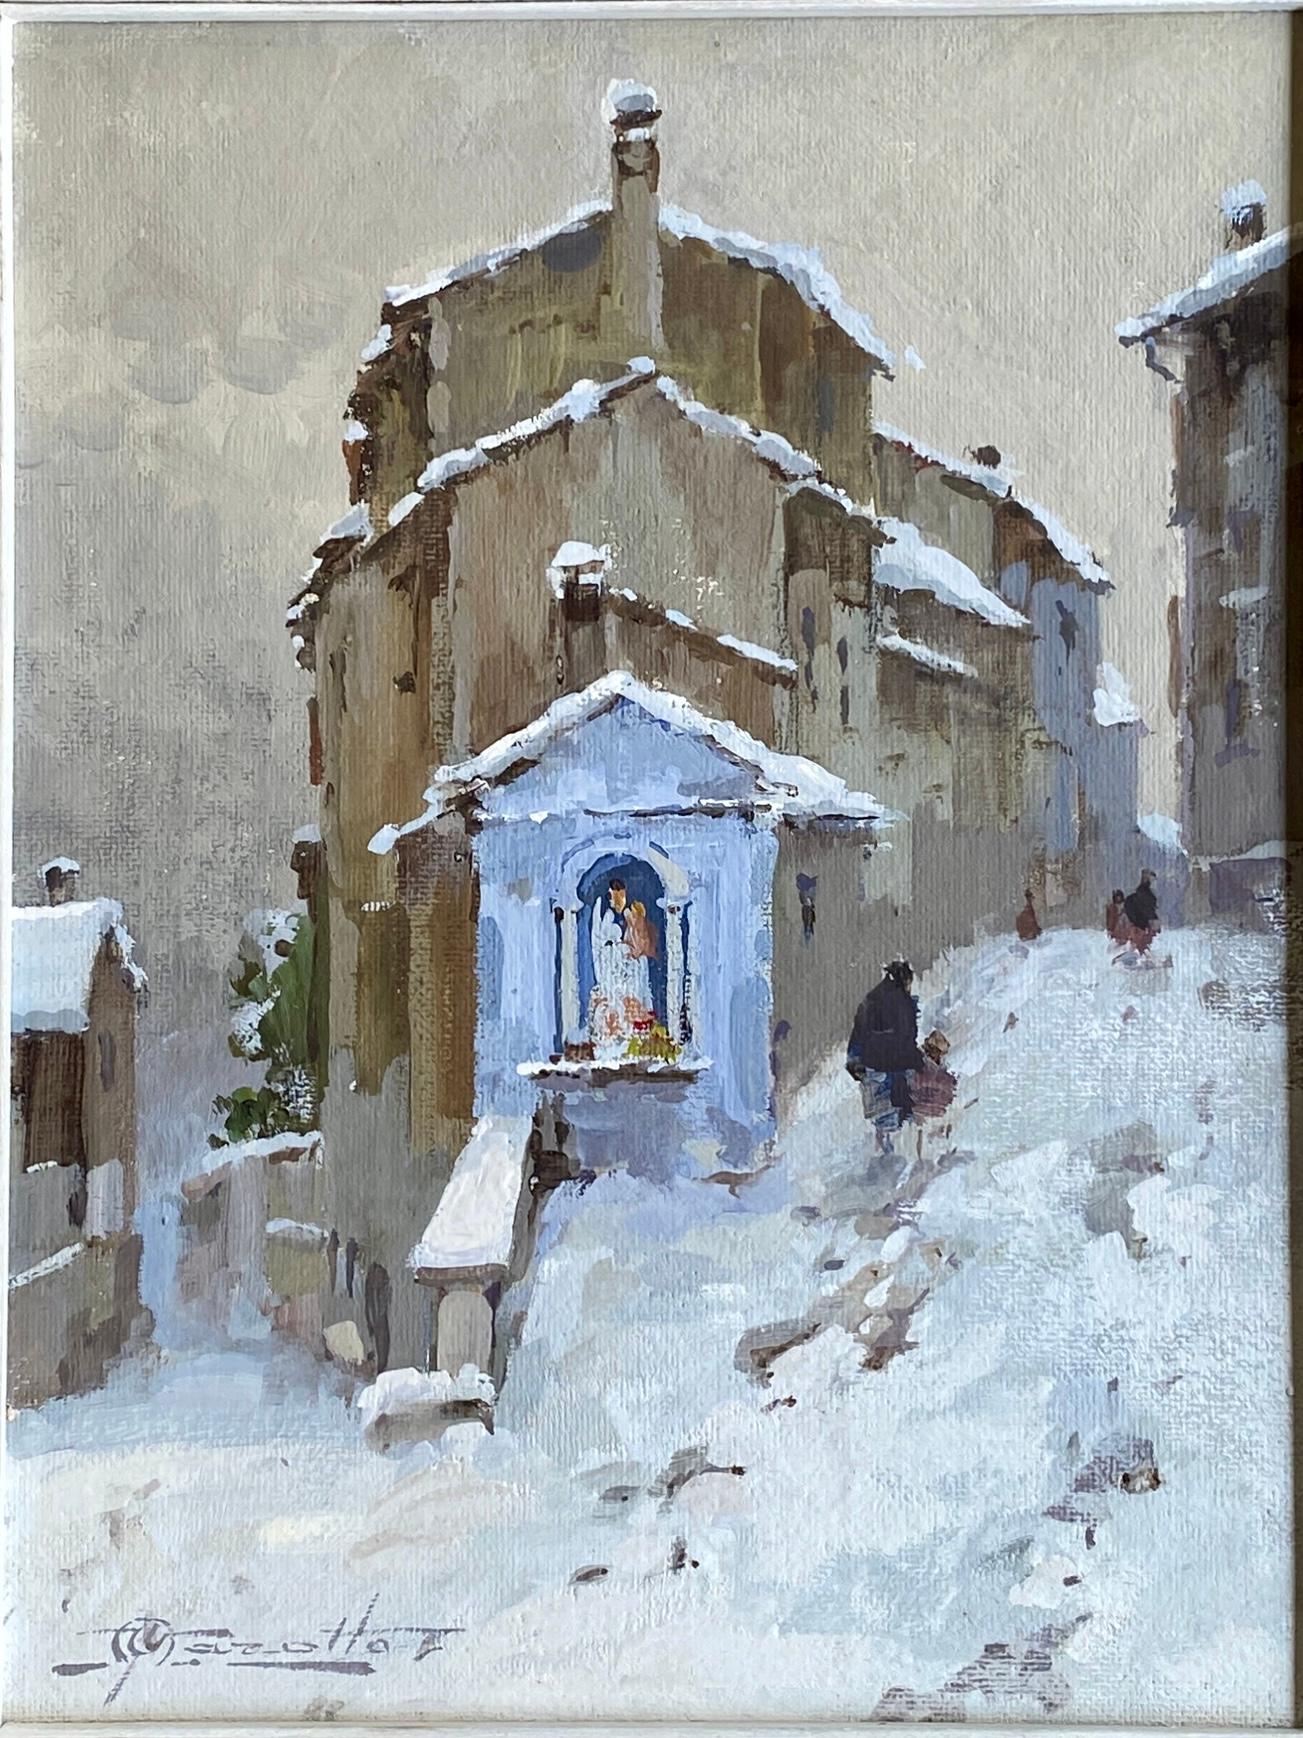 Oil on canvas applied to panel by Ulderico Marotto depicting a snowy road junction in Cavaion Veronese, province of Verona.
The painting is signed lower left.
On the back is an inscription 